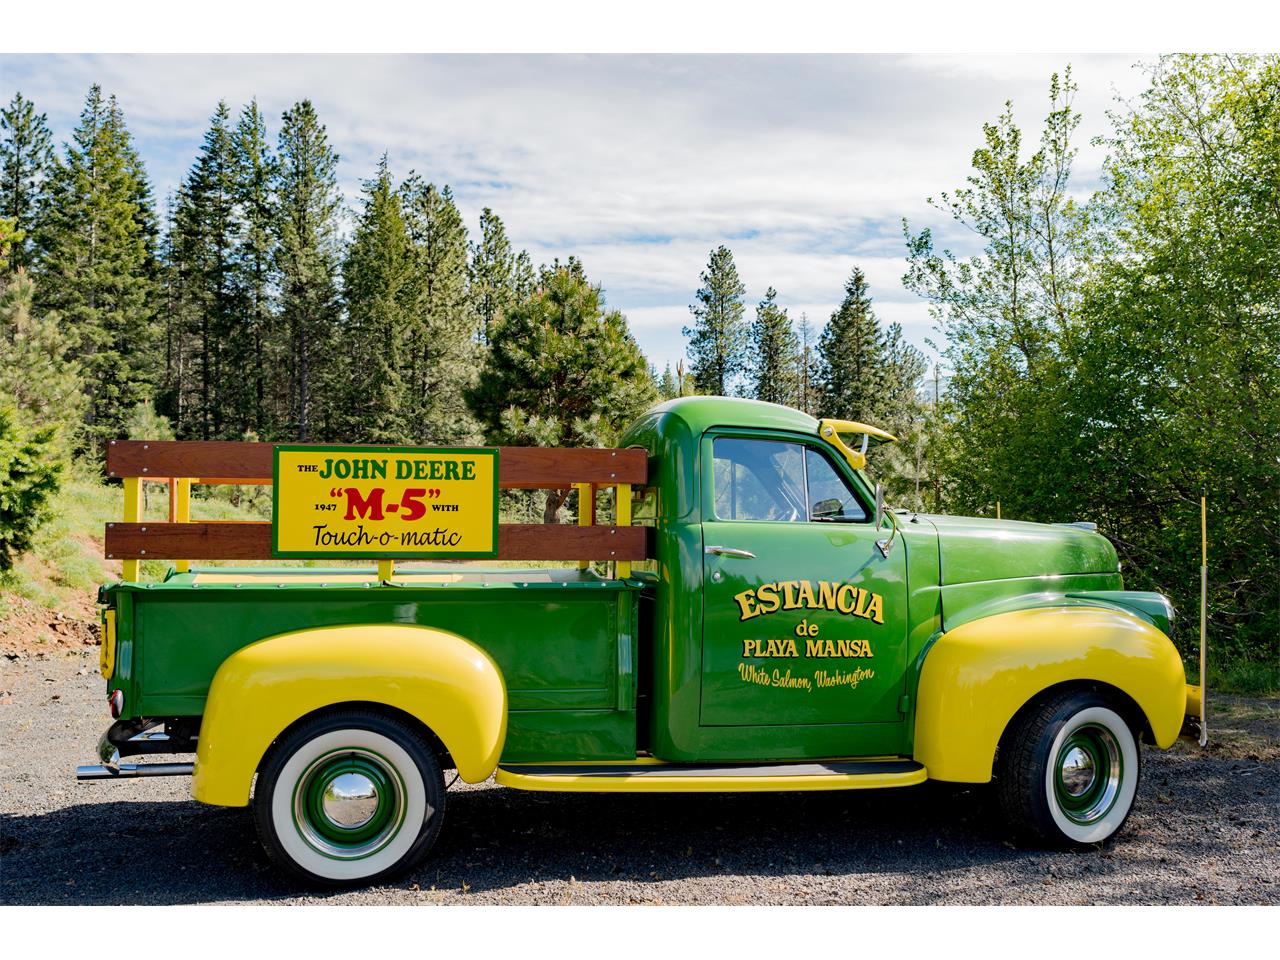 1947 Studebaker M-5 Express Pick-up for Sale | ClassicCars.com | CC-985541